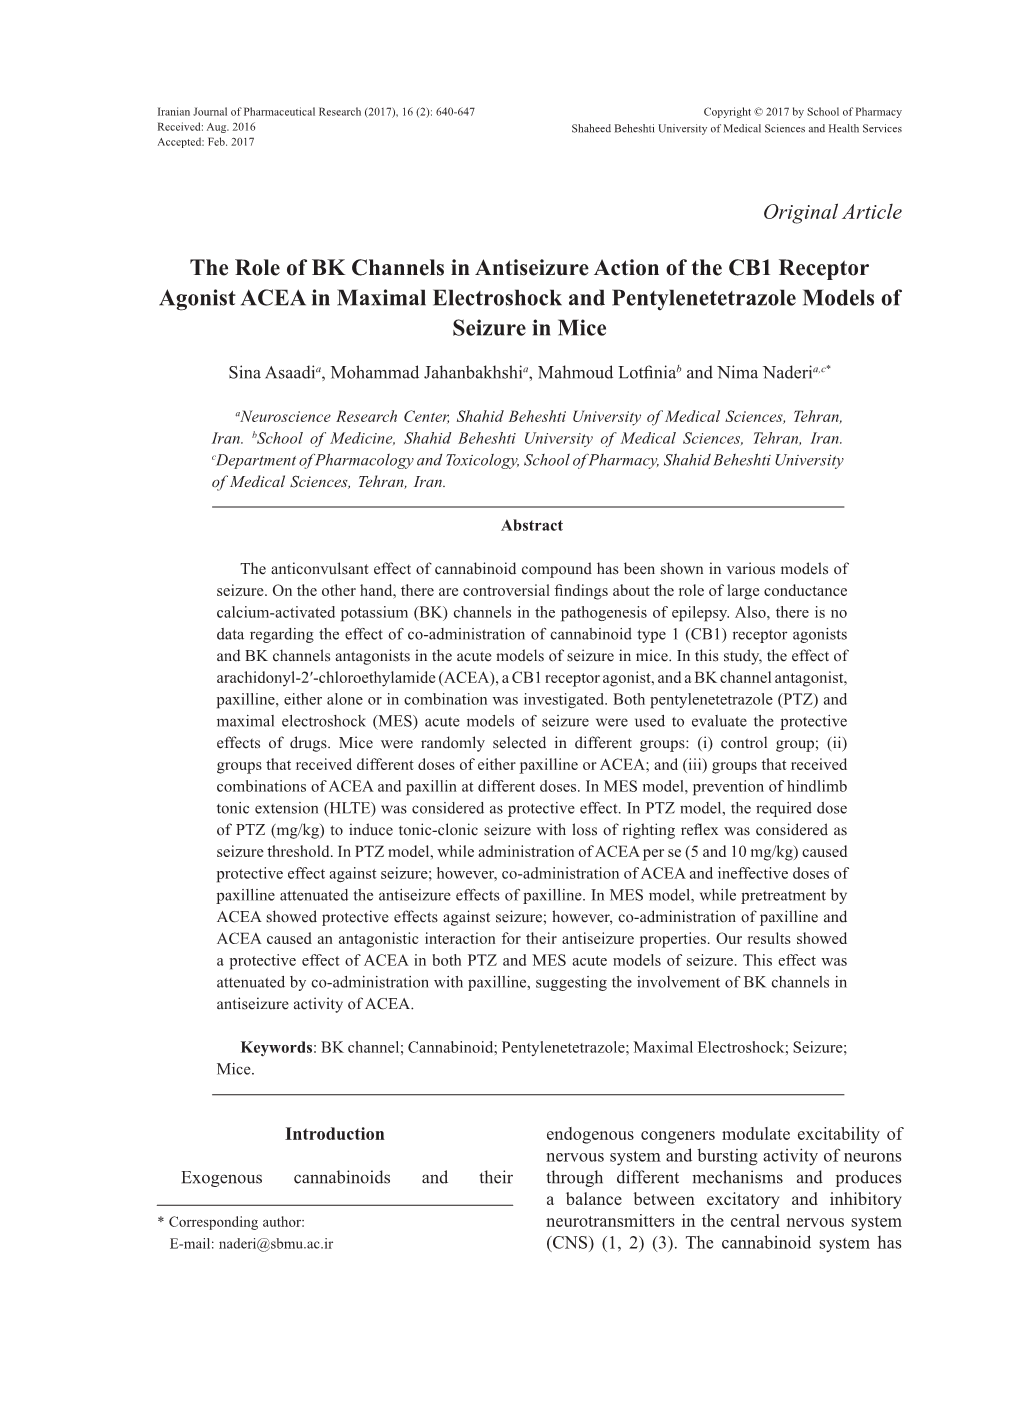 The Role of BK Channels in Antiseizure Action of the CB1 Receptor Agonist ACEA in Maximal Electroshock and Pentylenetetrazole Models of Seizure in Mice